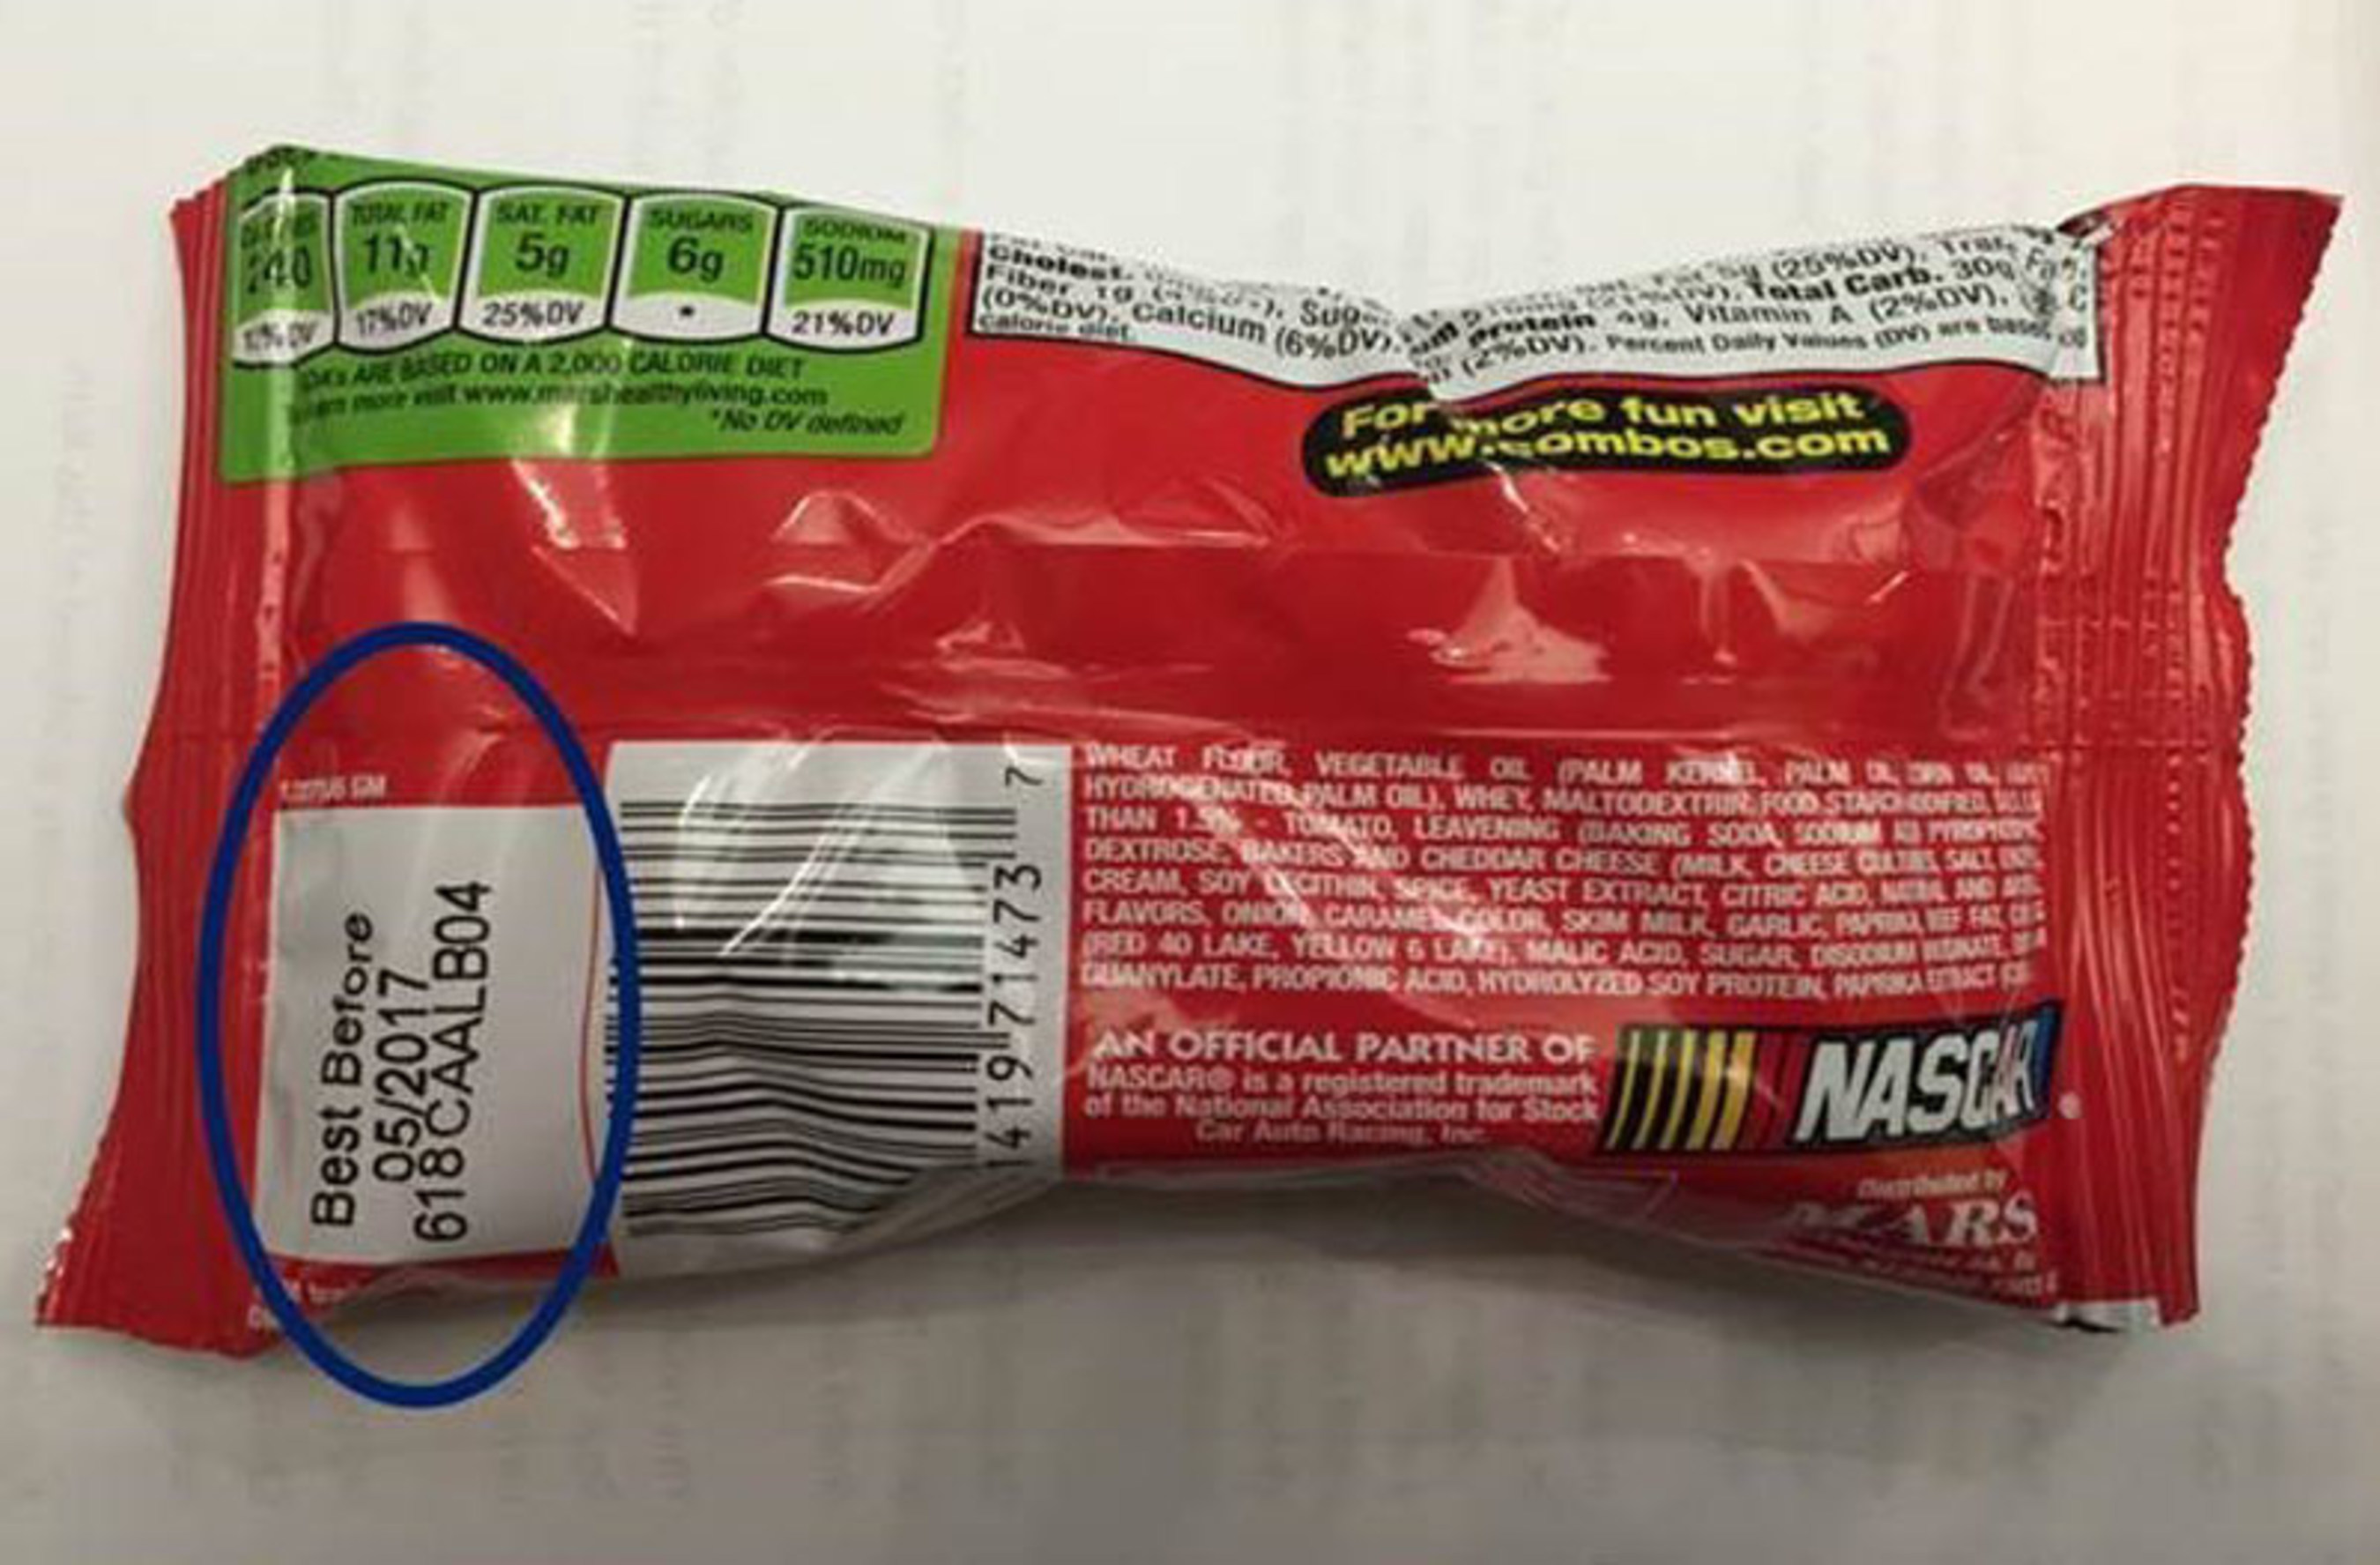 Mars Chocolate North America Issues Allergy Alert For Select Varieties Of COMBOS(R) For Potential Undeclared Peanut Residue